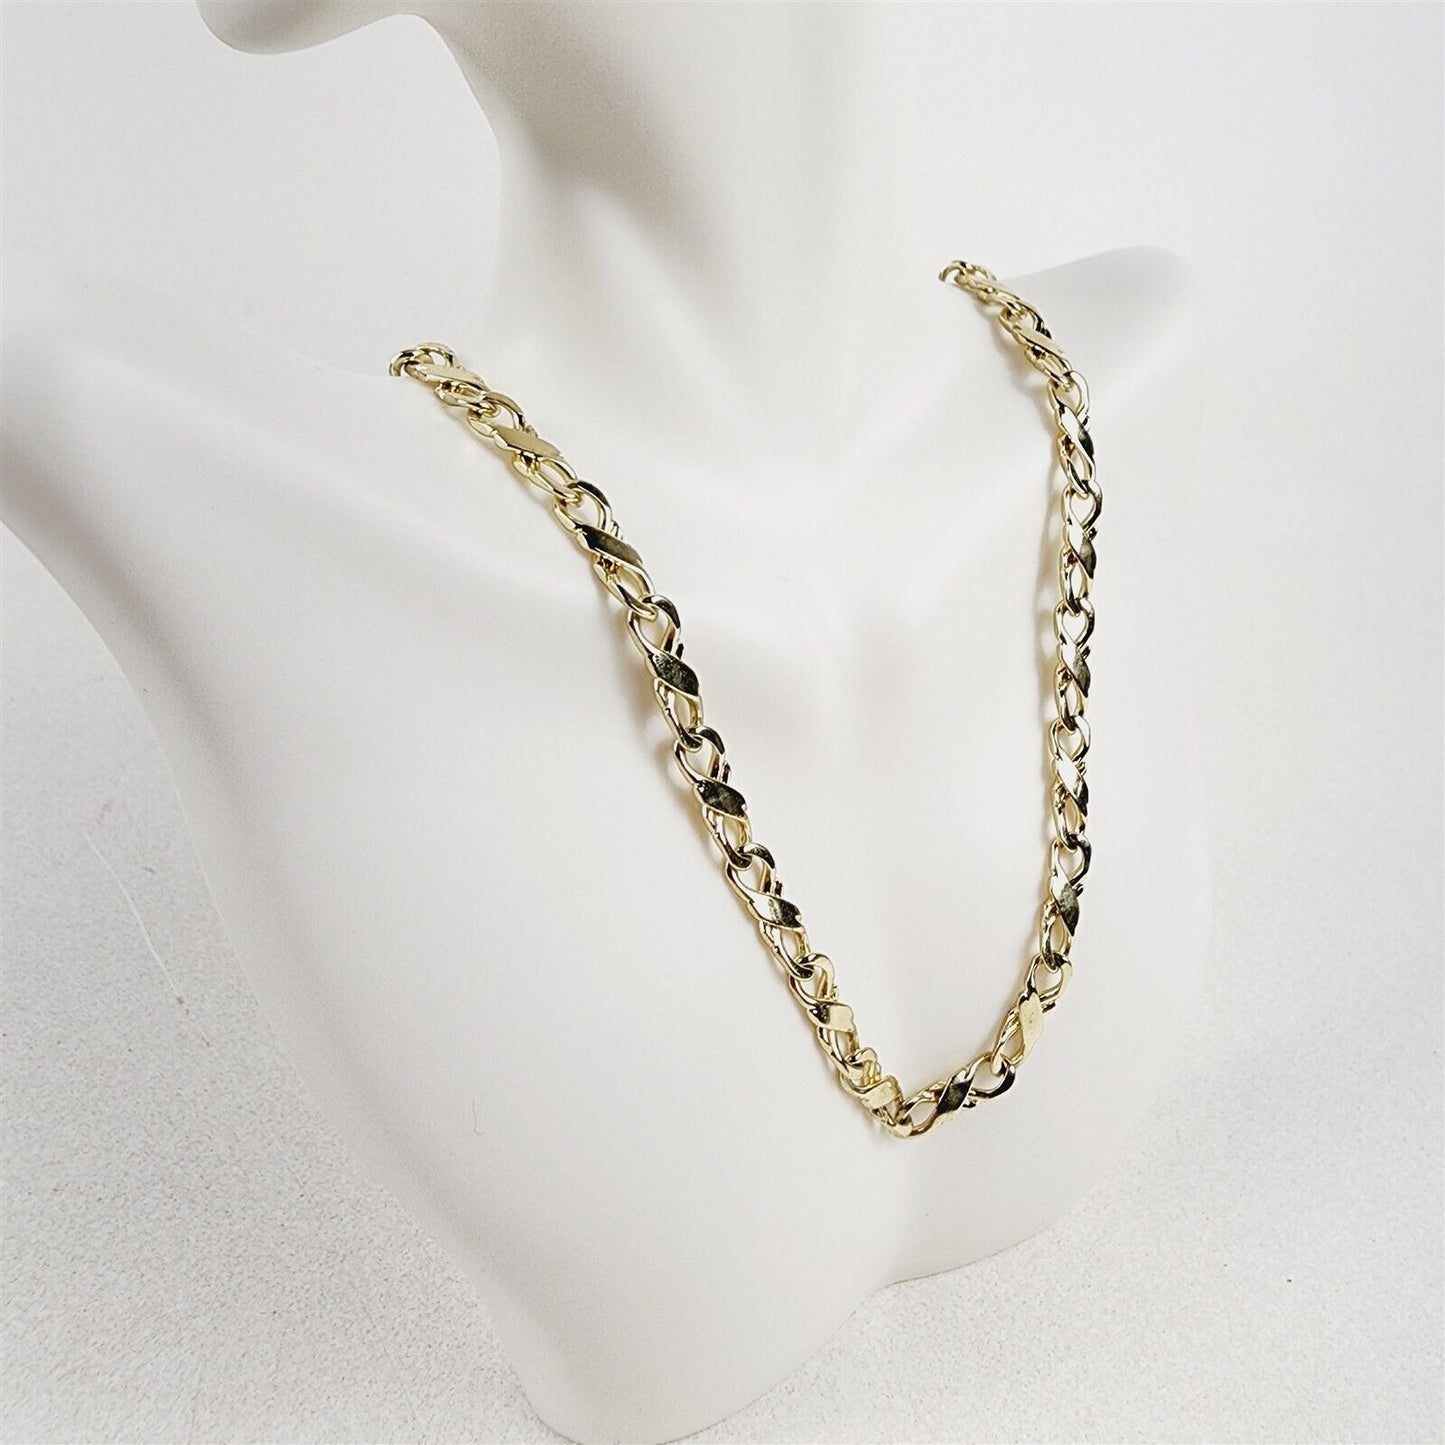 14K Gold Plated Necklace Infinity Link Chain - 17"